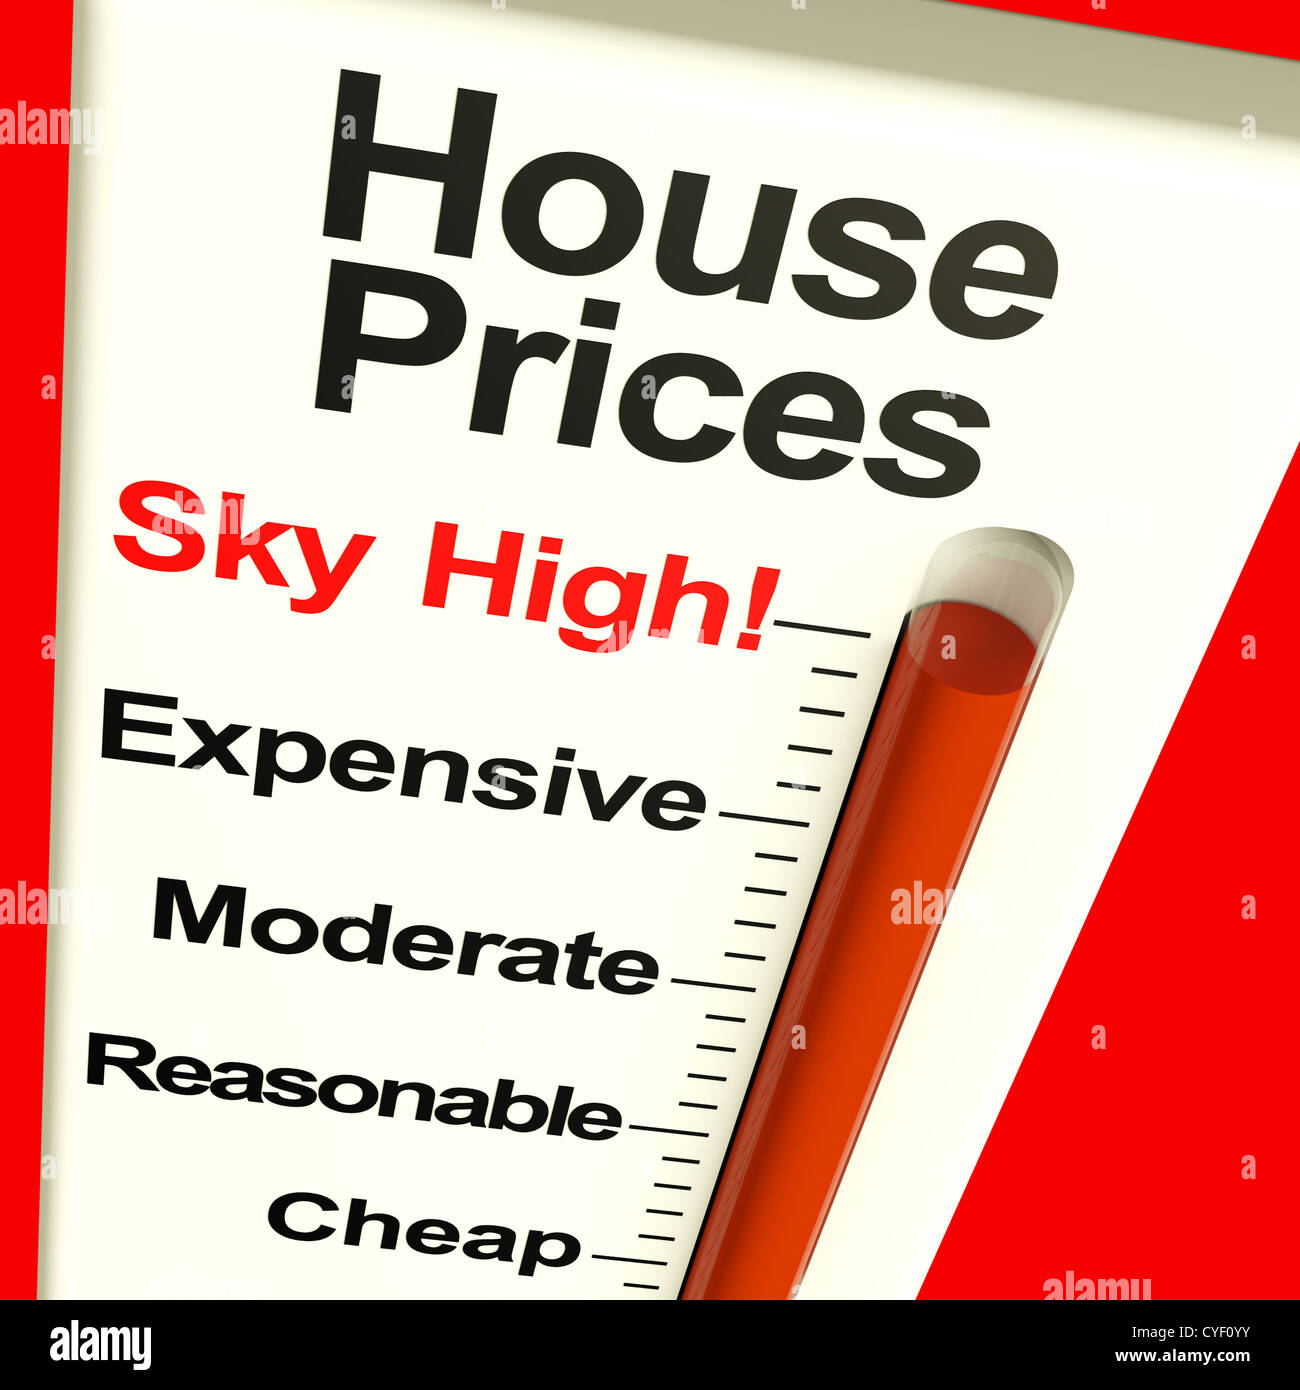 House Prices High Monitor Showing Expensive Mortgage Cost Stock Photo